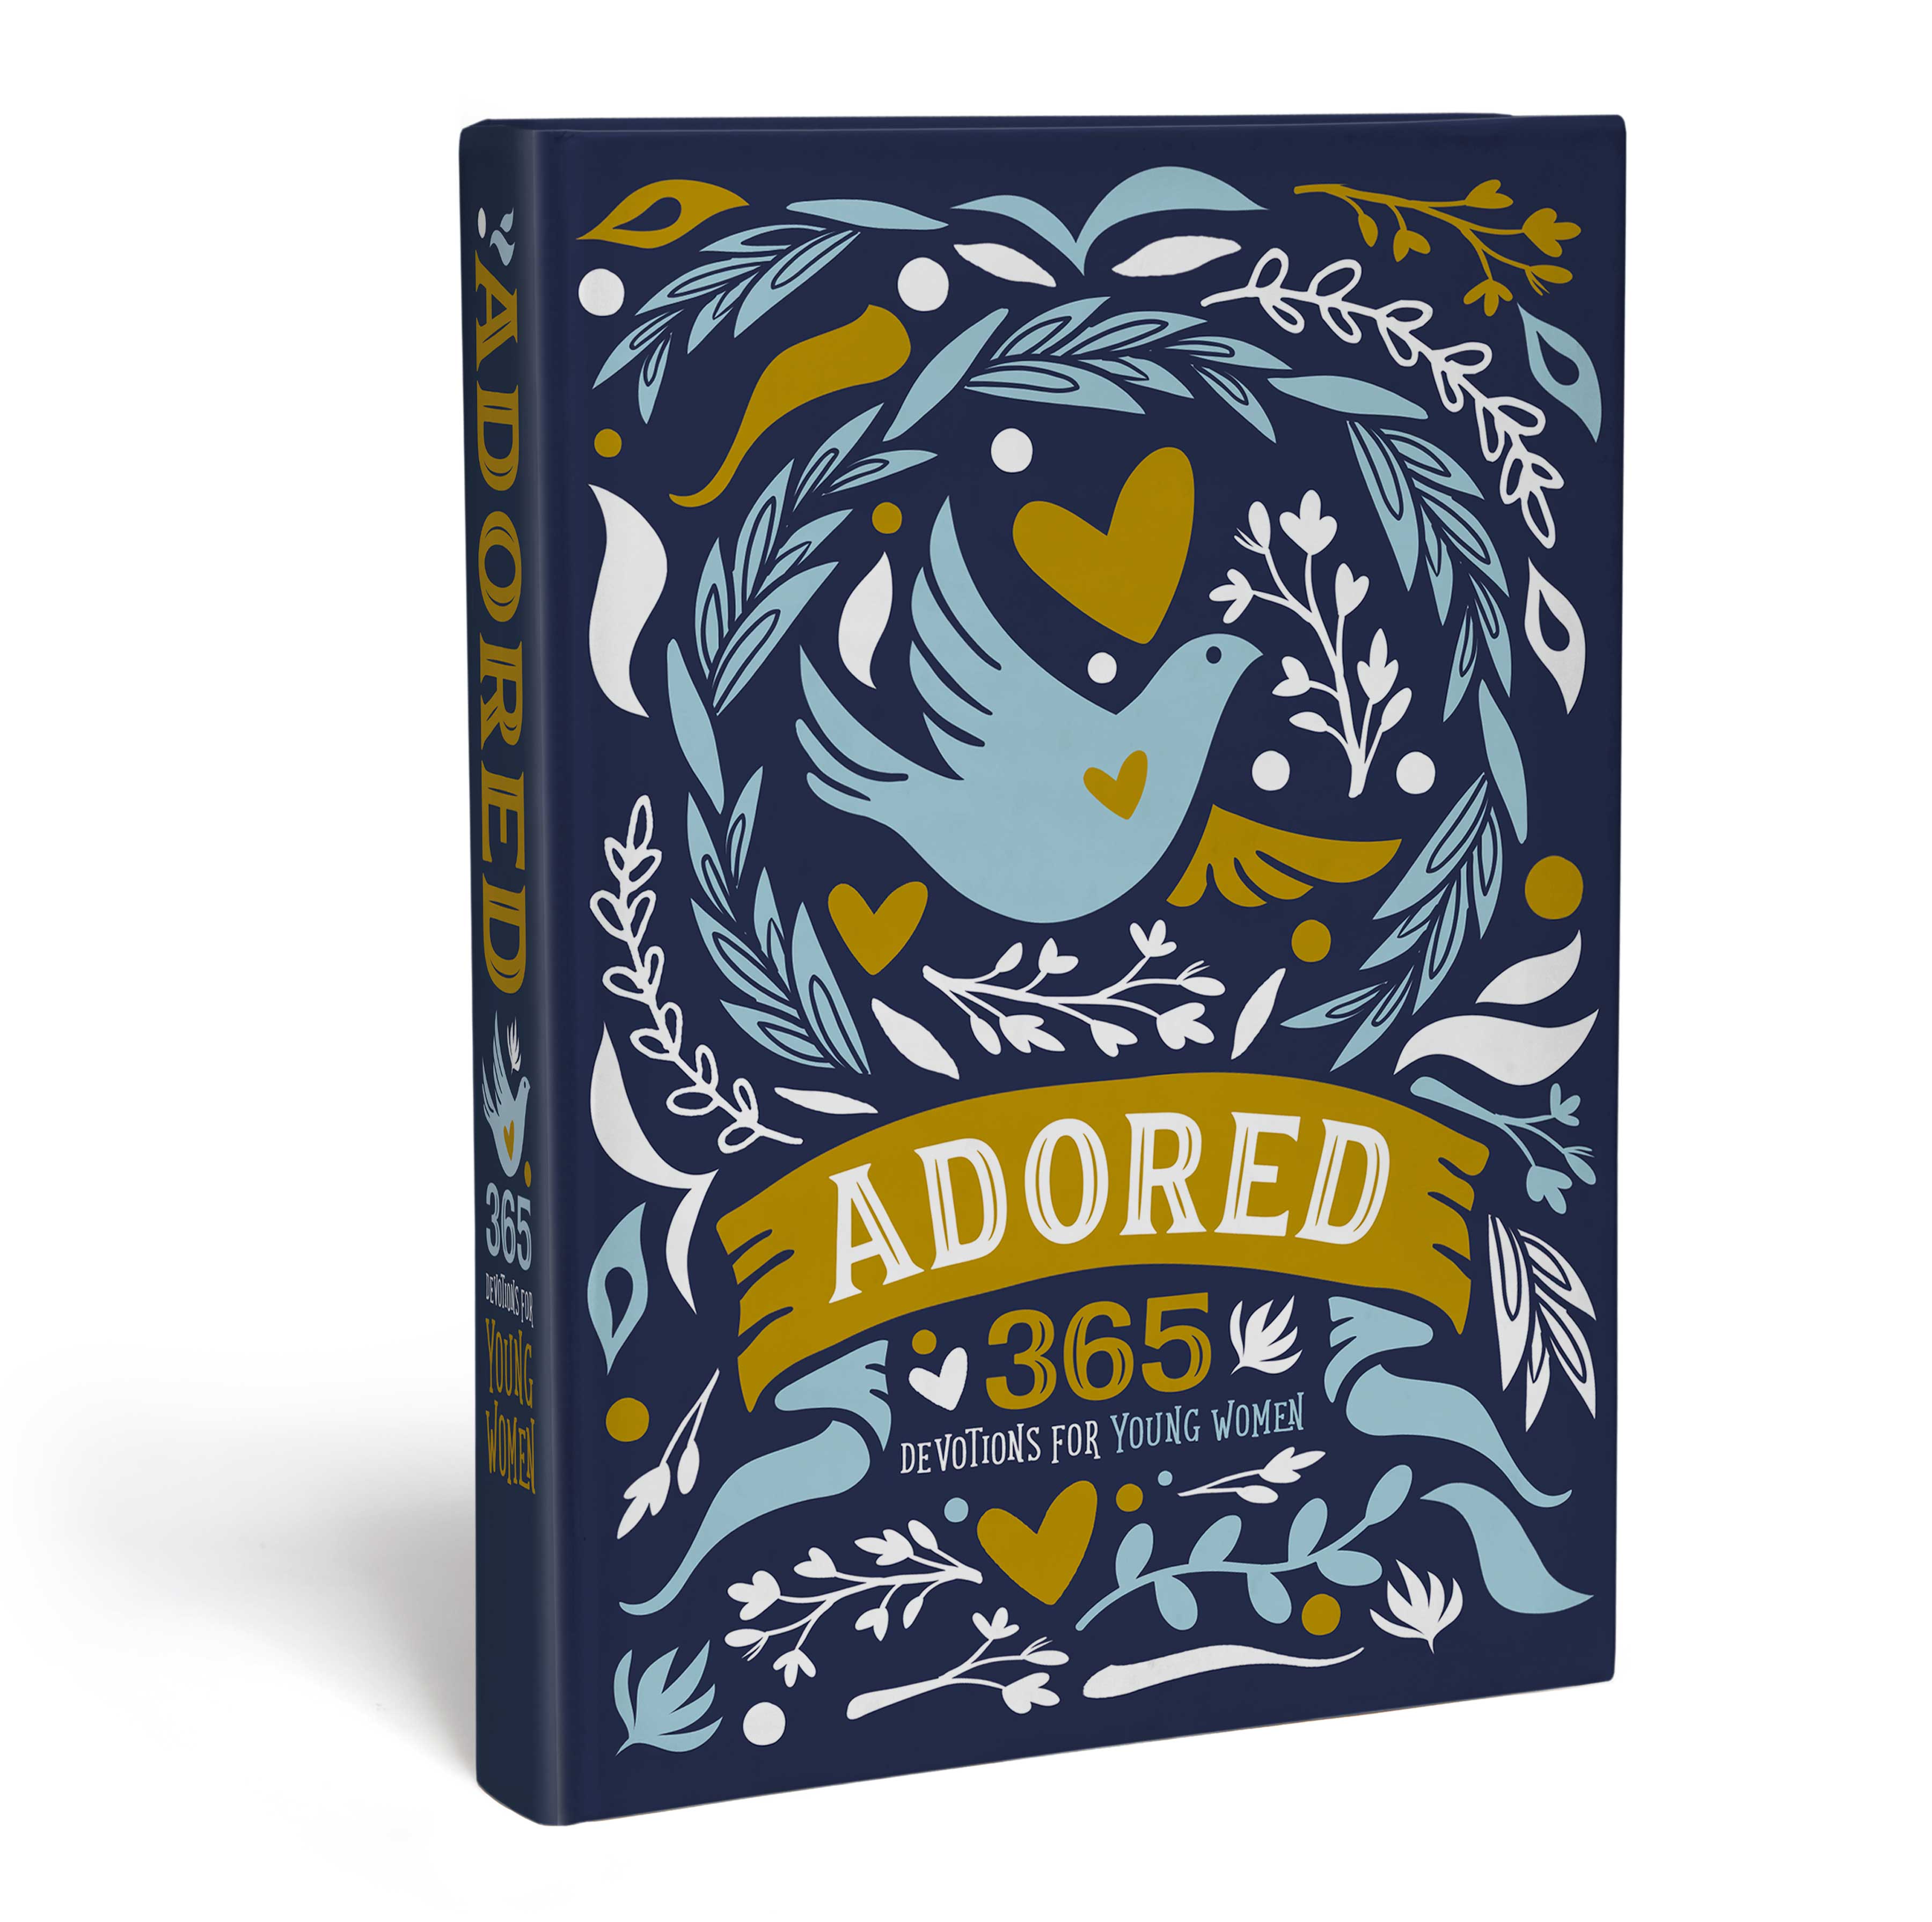 ROCKONLINE | New Creation Church | NCC | Joseph Prince | ROCK Bookshop | ROCK Bookstore | Star Vista | Adored: 365 Devotions for Young Women | Young Women | Hardcover | Devotionals | Free delivery for Singapore Orders above $50.